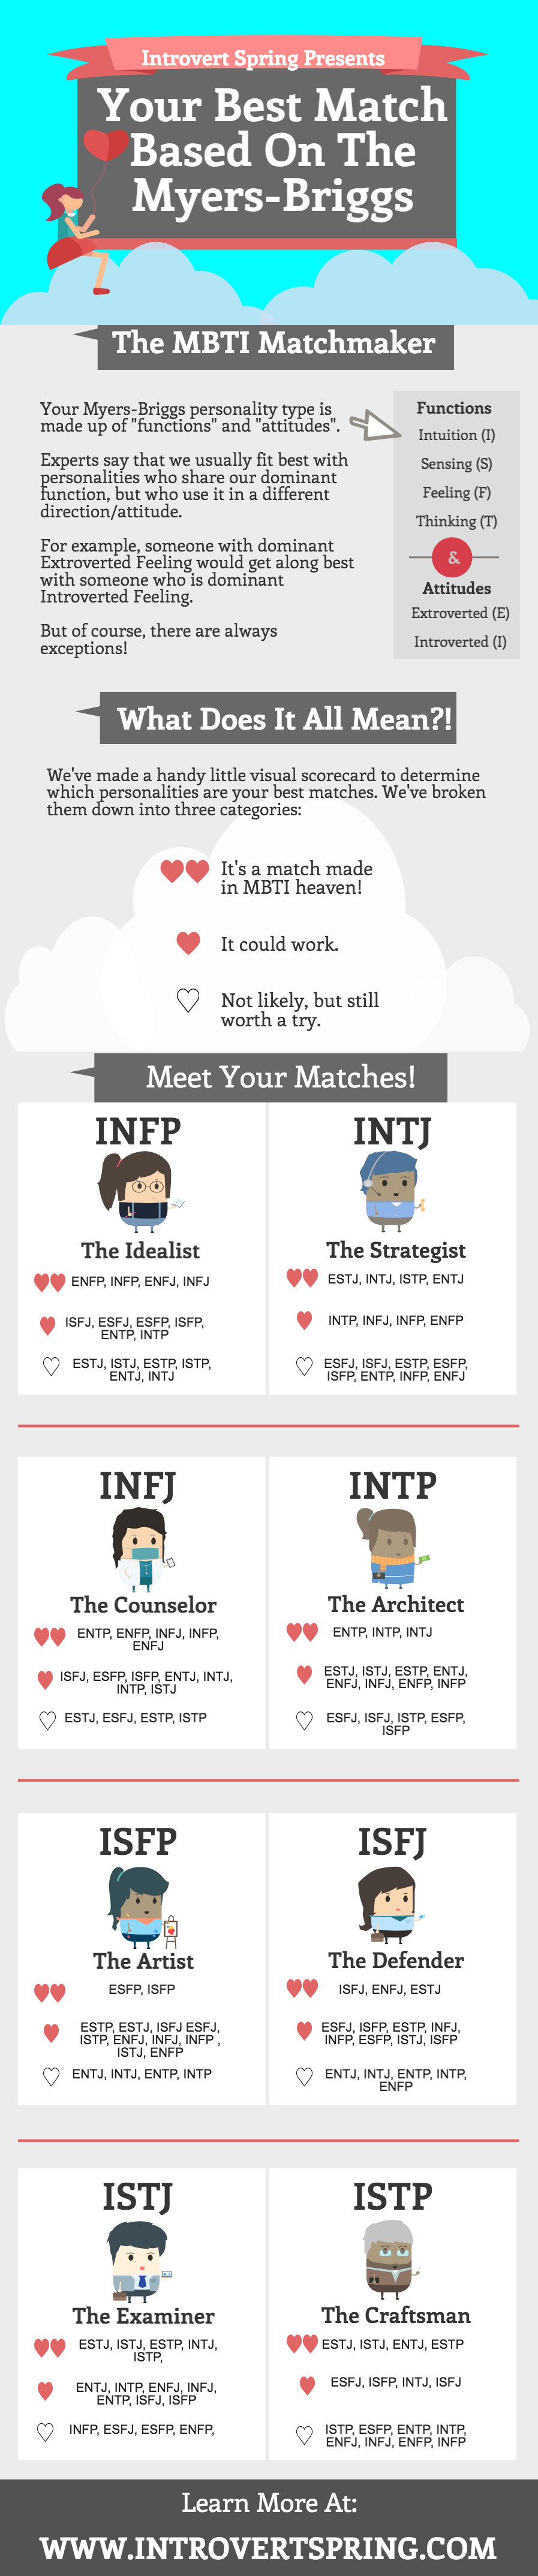 Infp dating isfp